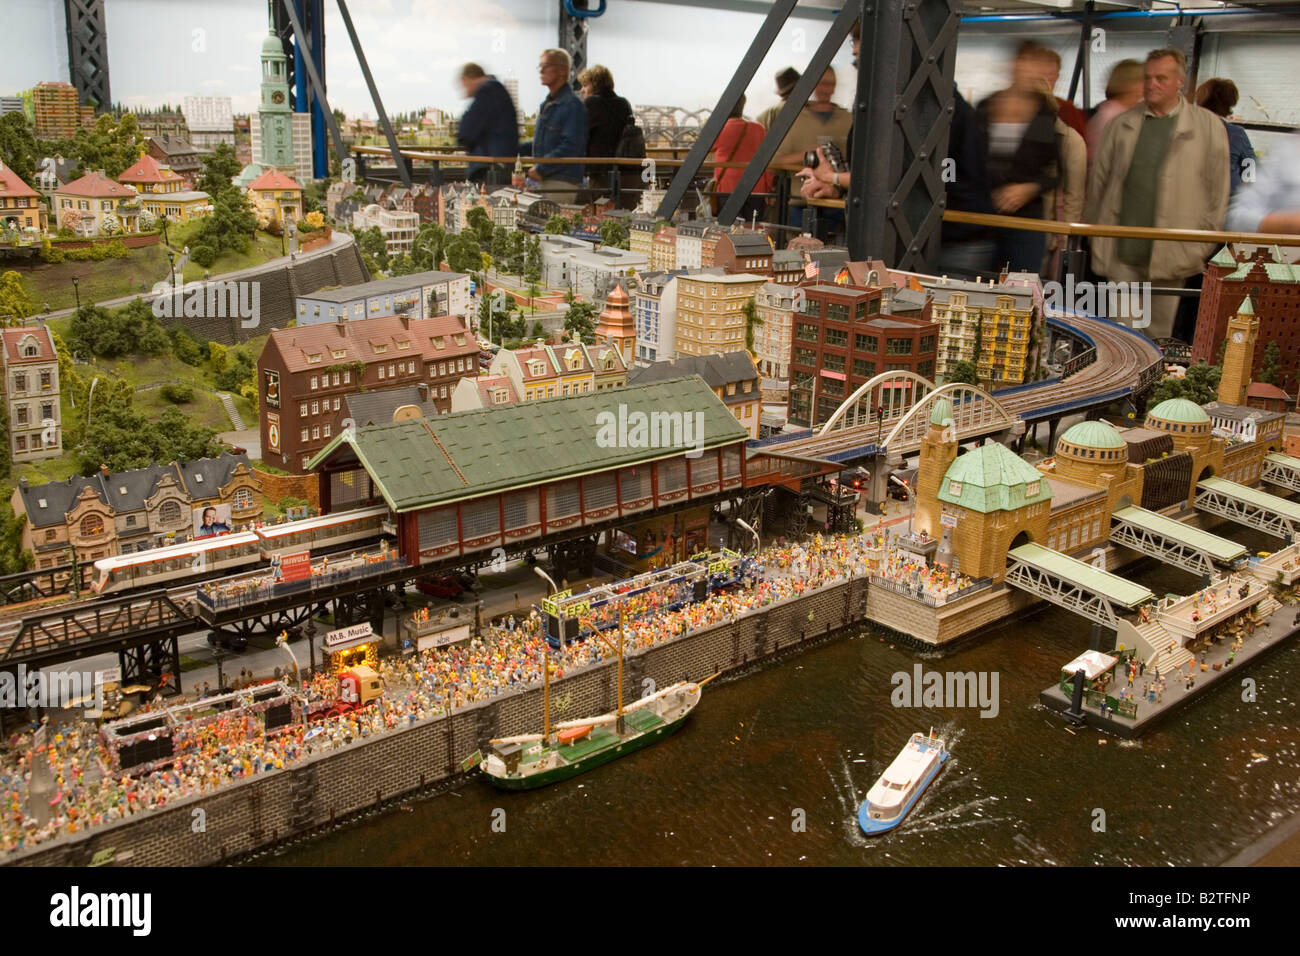 Visitors watching the model railroad, Visitors watching the largest model railroad in the world, the Miniatur Wunderland, Speich Stock Photo